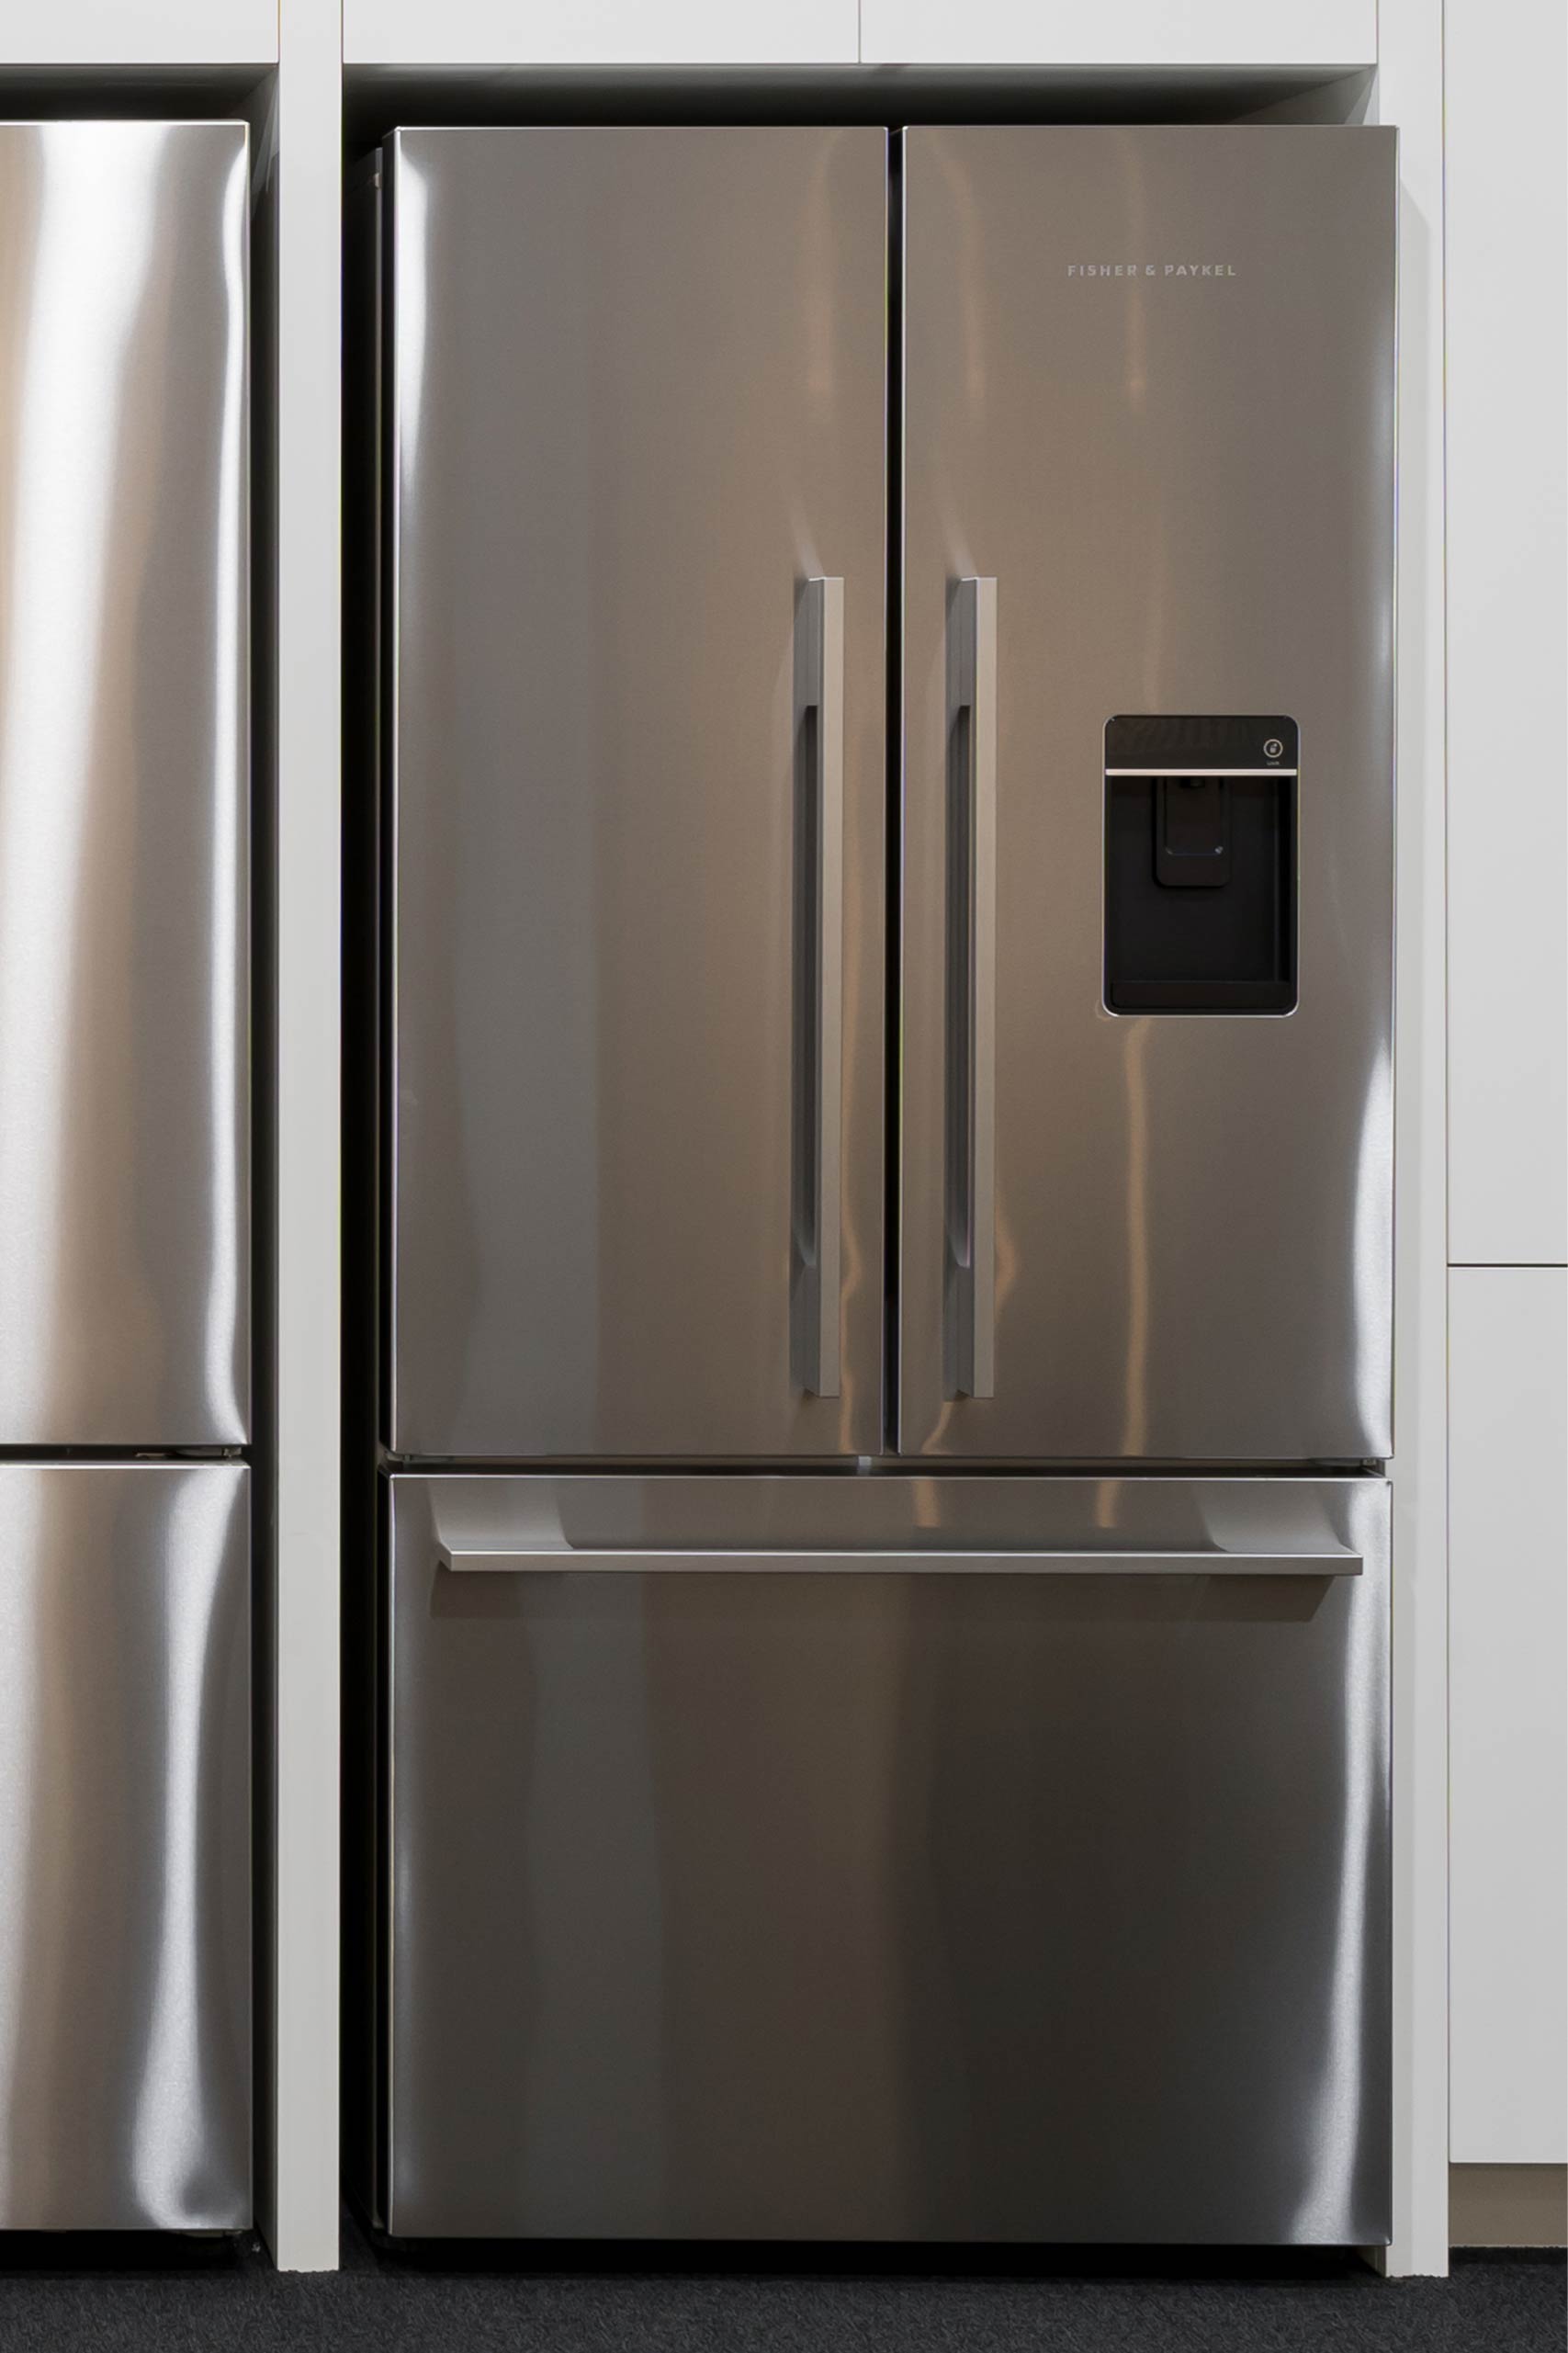 We offer Fisher & Paykel products with all DIY projects